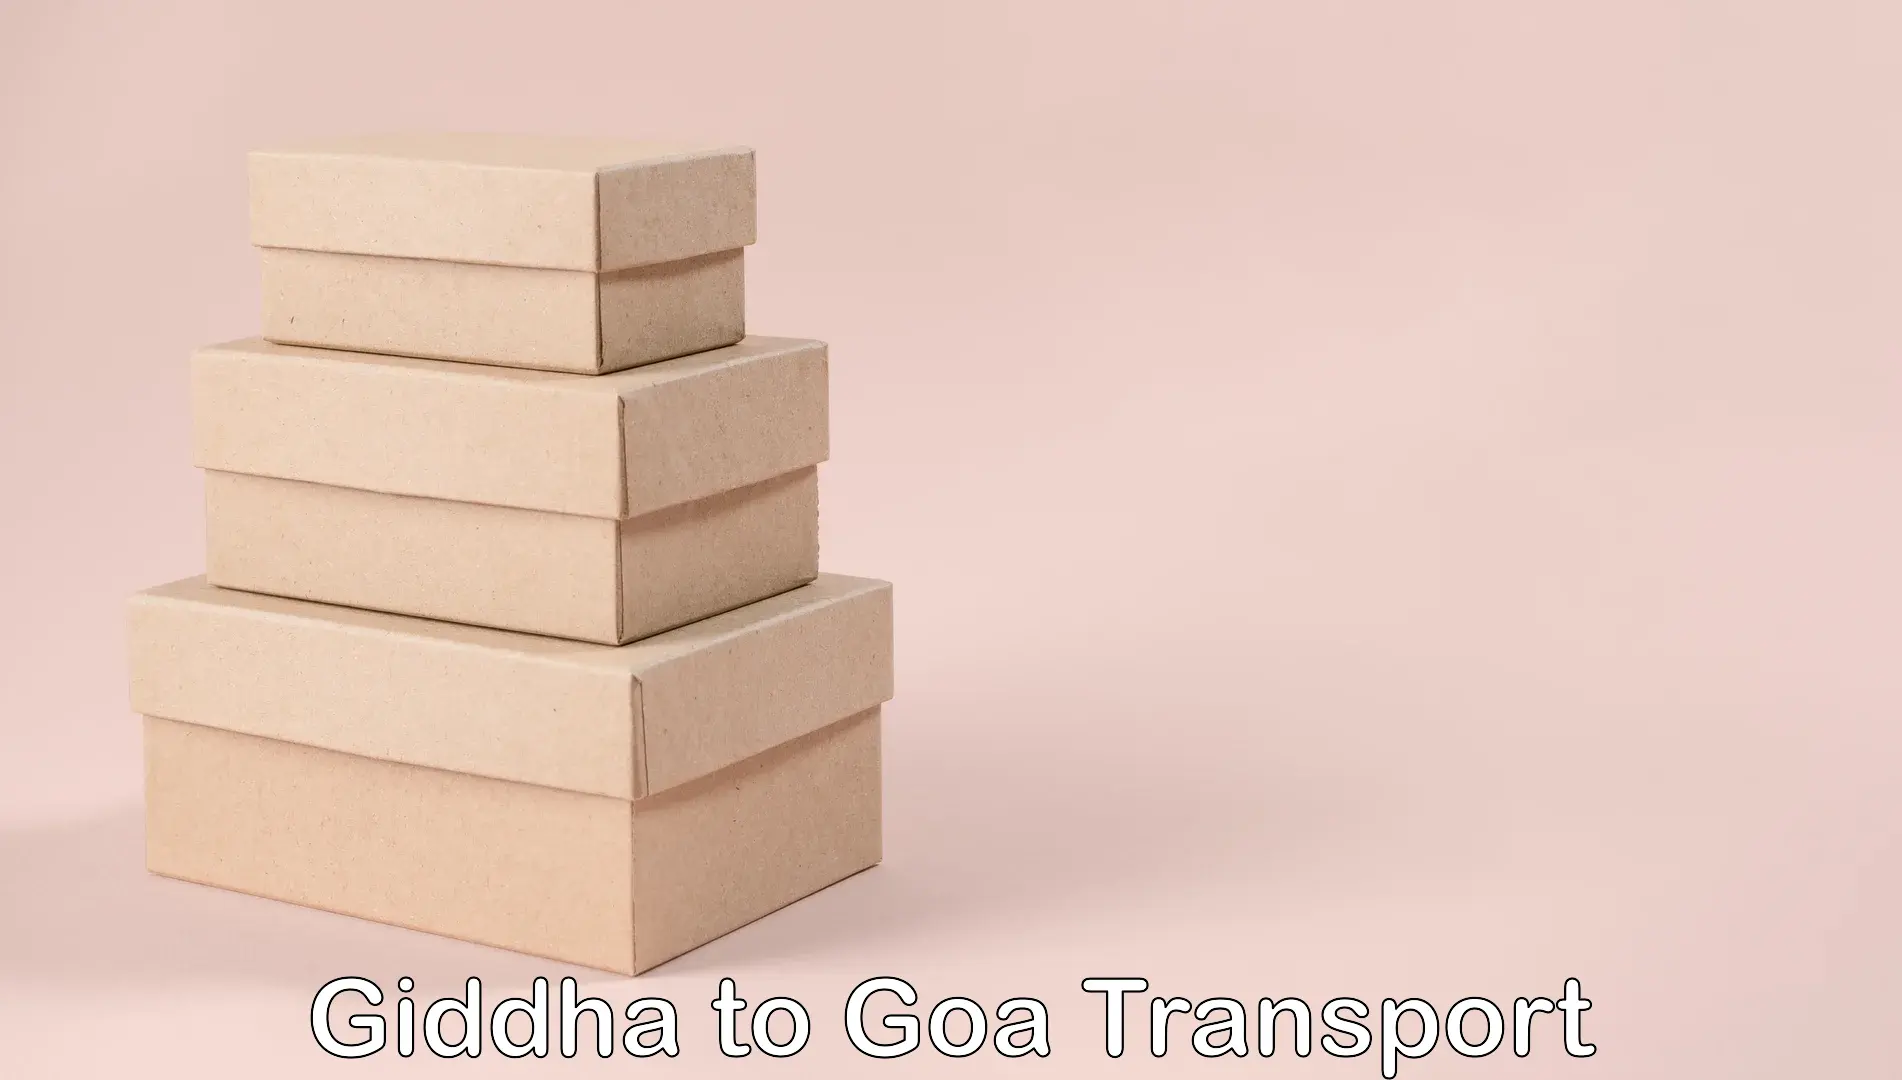 Delivery service Giddha to Goa University